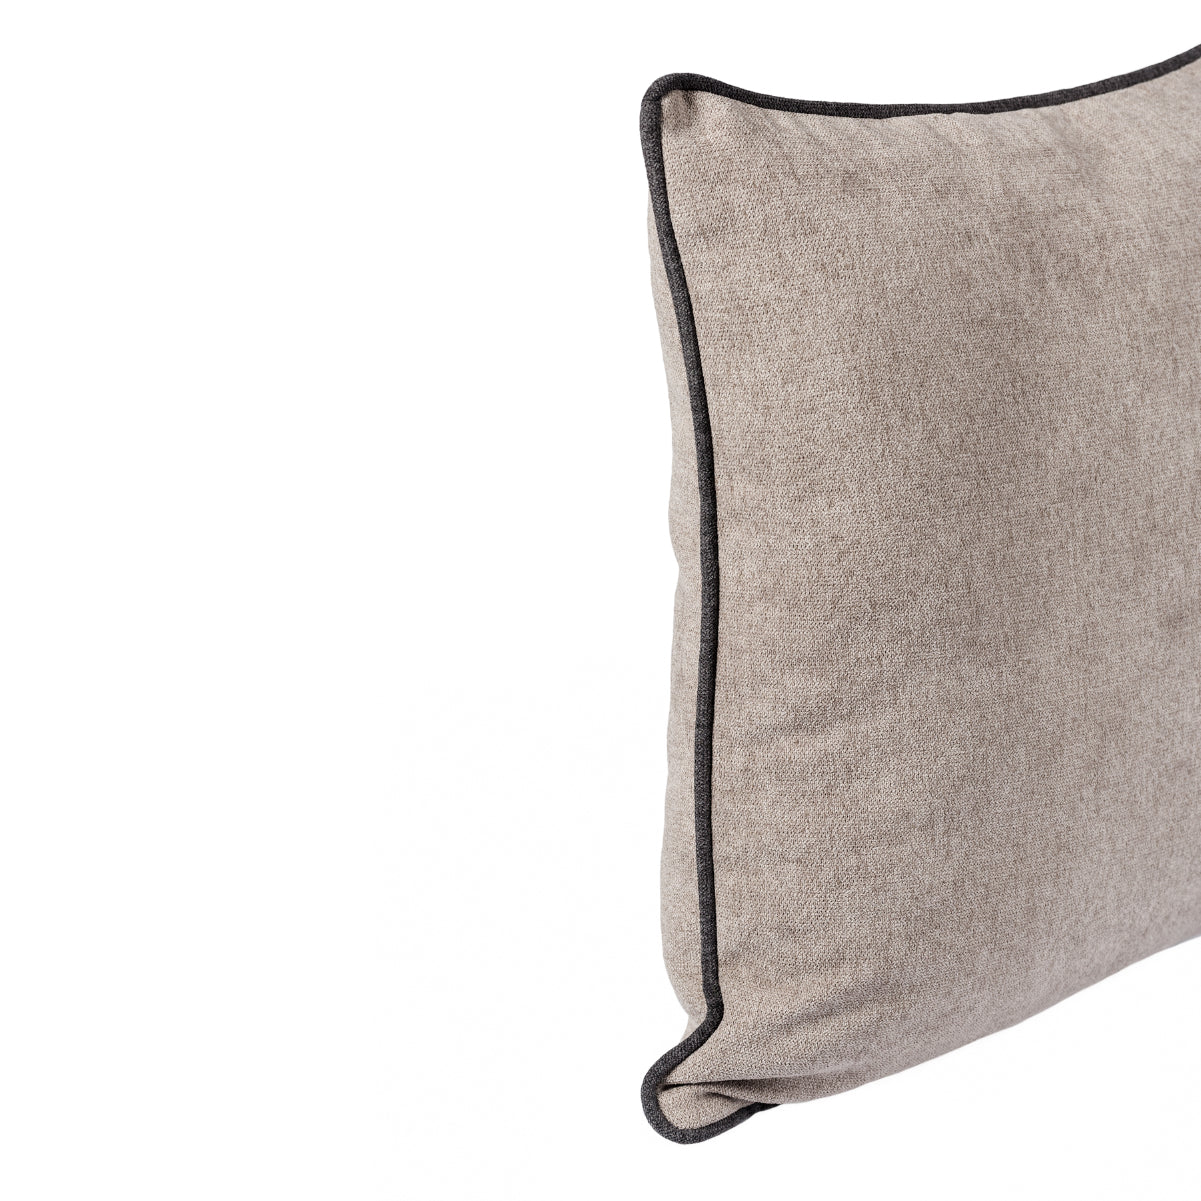 Cushion BELLUS 45x45 Velvet Beige Taupe with Black Cord